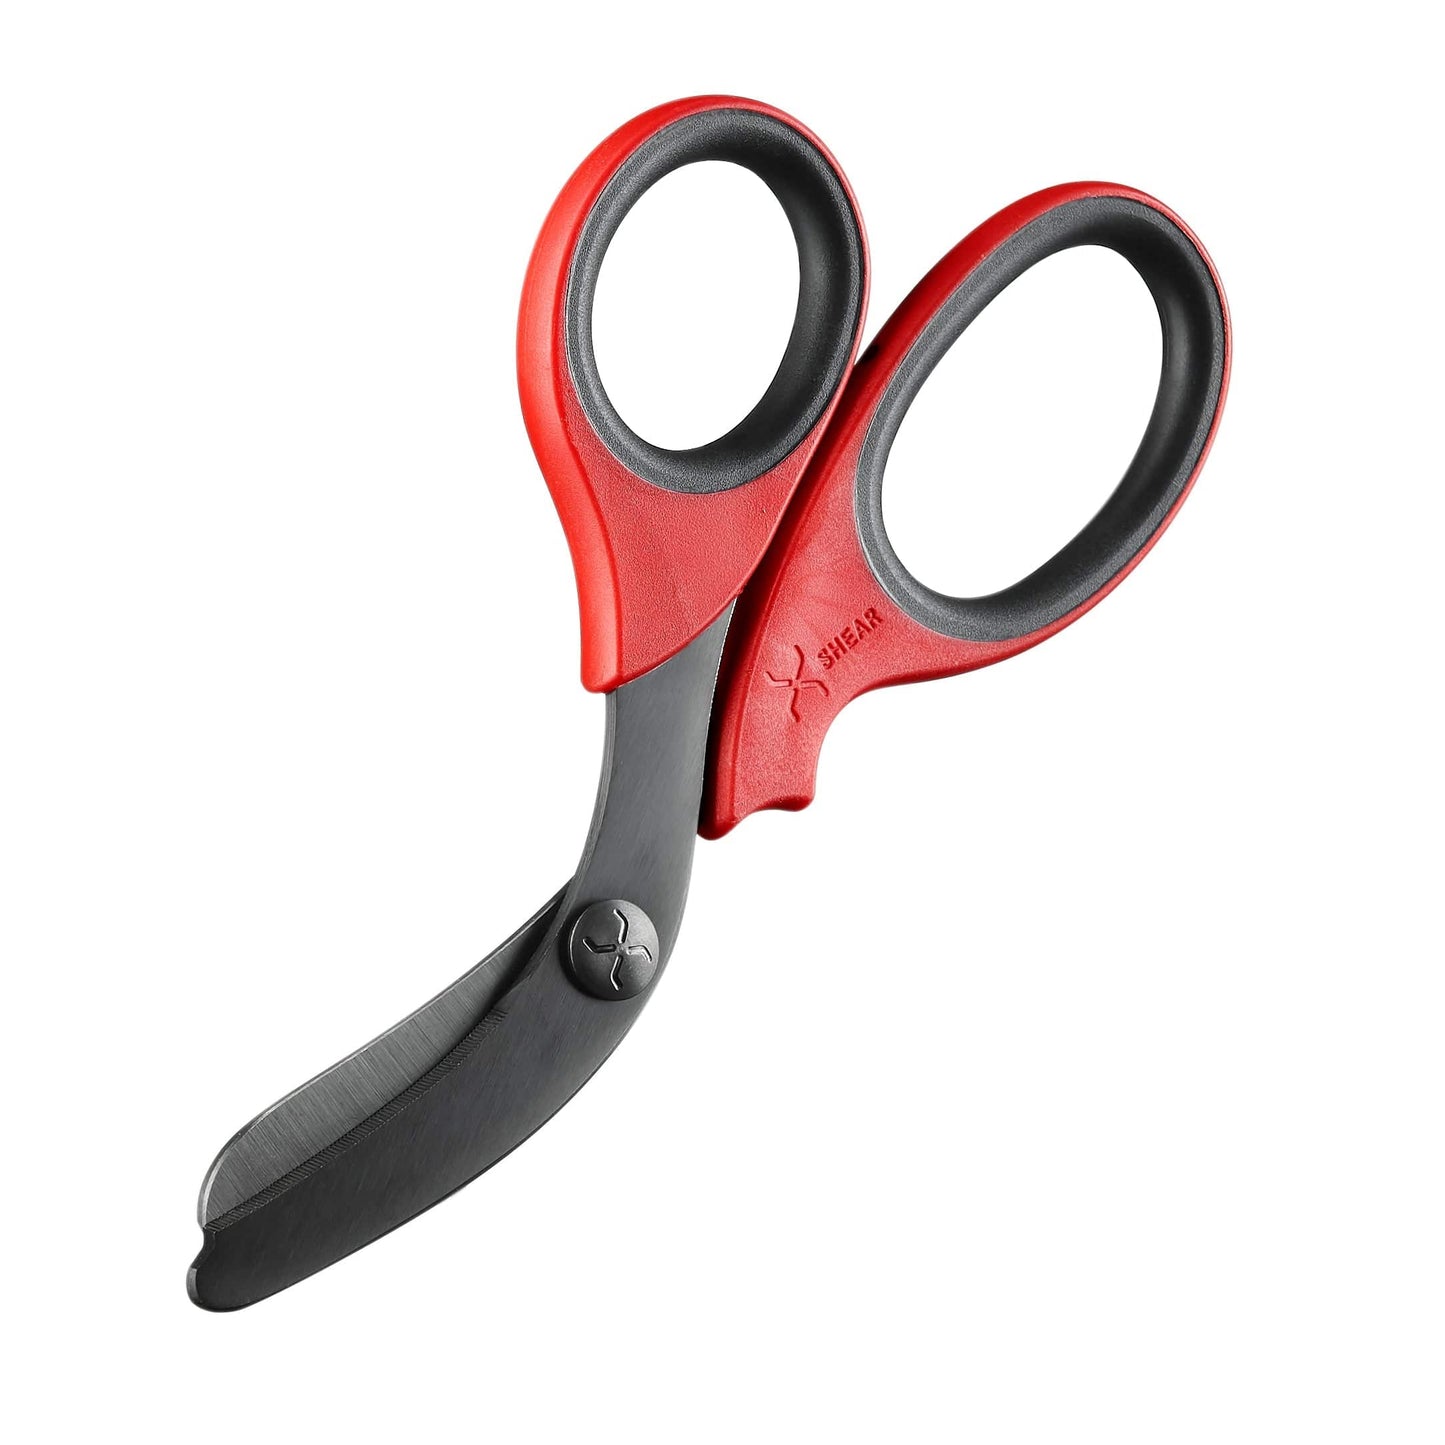 Chief Miller Shears XShear 7.5” Heavy Duty Trauma Shears. Red & Black Handles, Black Titanium Coated Stainless Steel Blades, For the Professional Emergency Provider Apparel